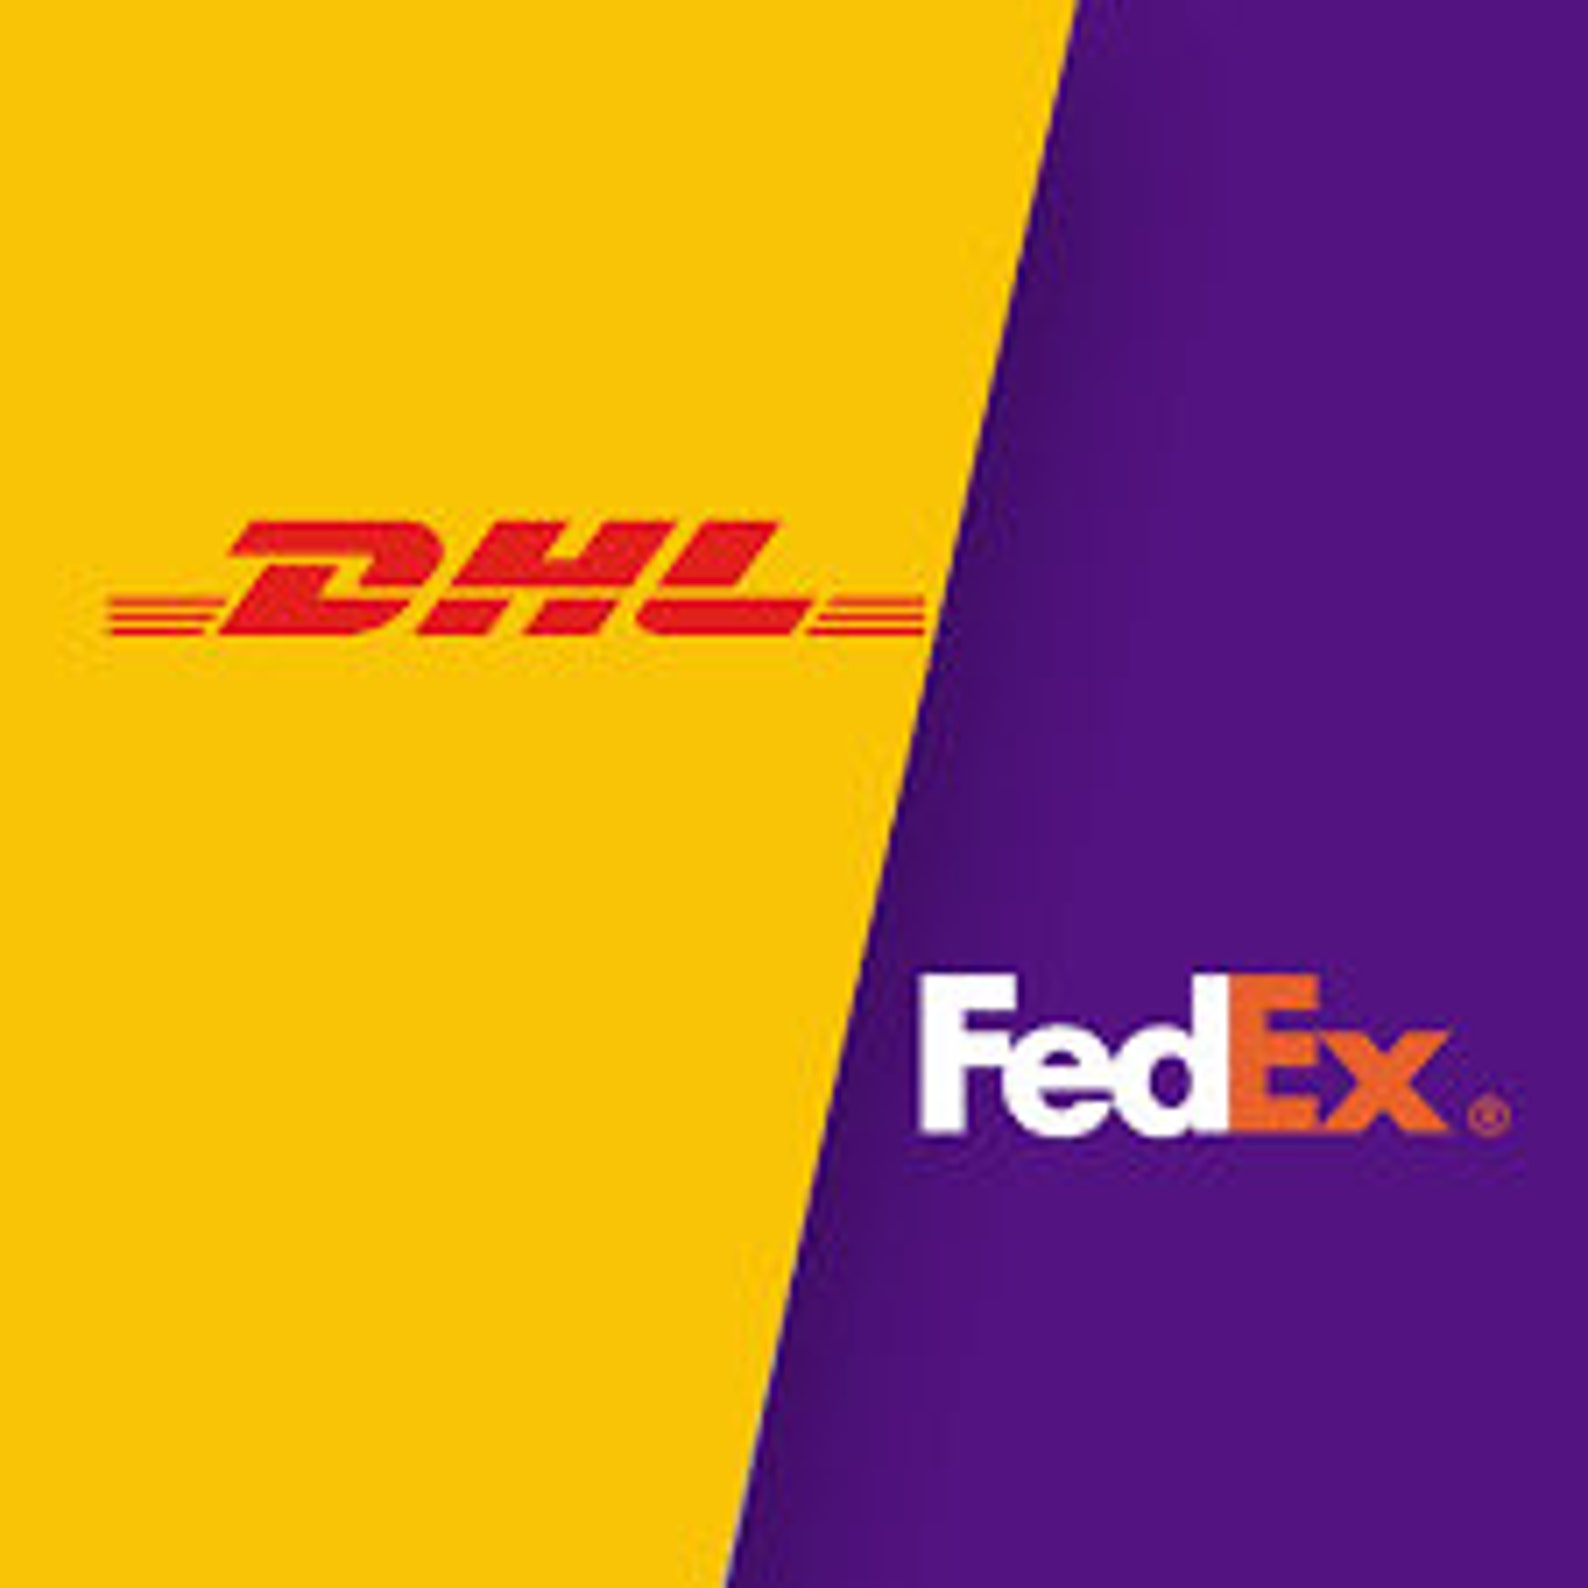 DHL / FedEx Express Shipping Upgrade For Fast Delivery | Etsy